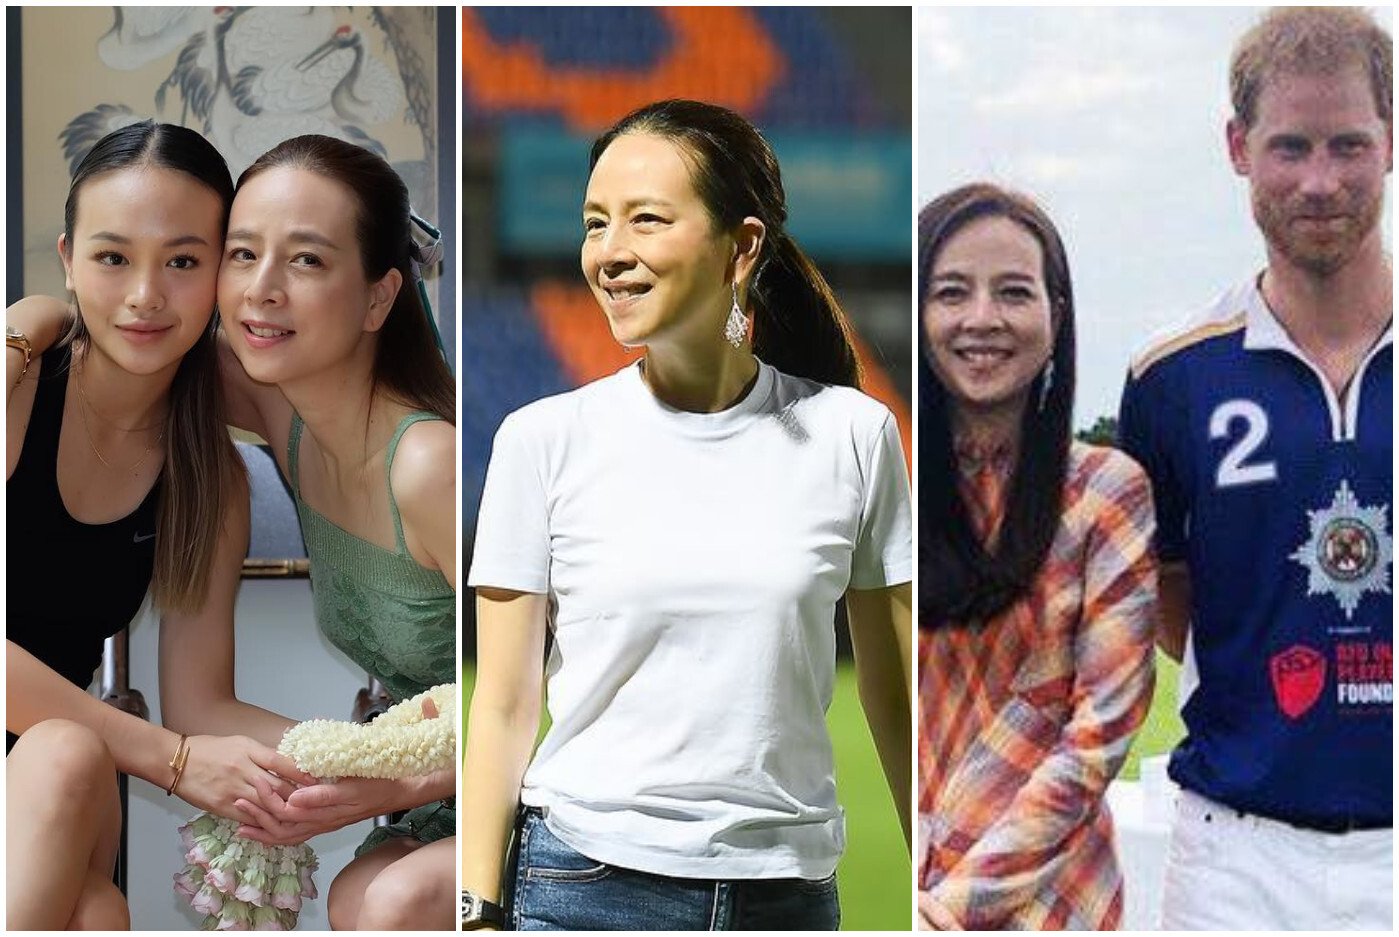 Eileen Gu cashed in 200 million RMB from global brand sponsorships